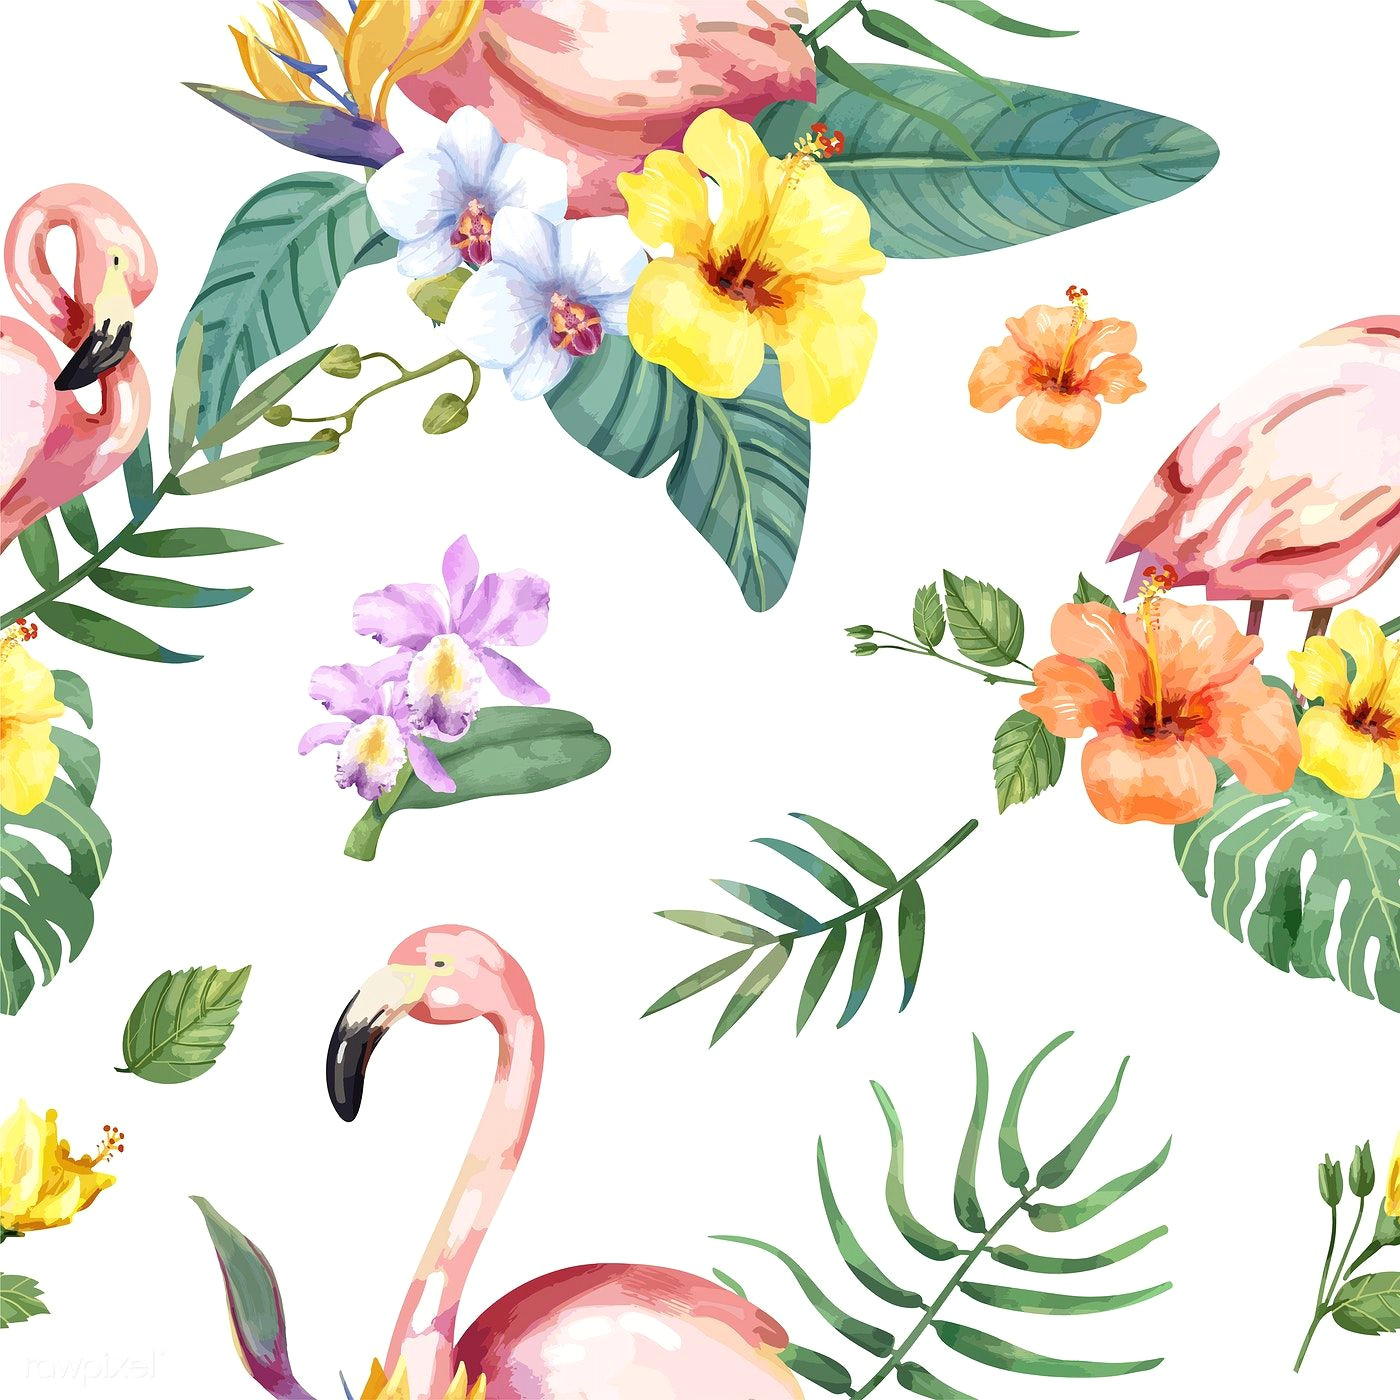 Drawing Of Exotic Flowers Hand Drawn Flamingo Bird with Tropical Flowers Premium Image by